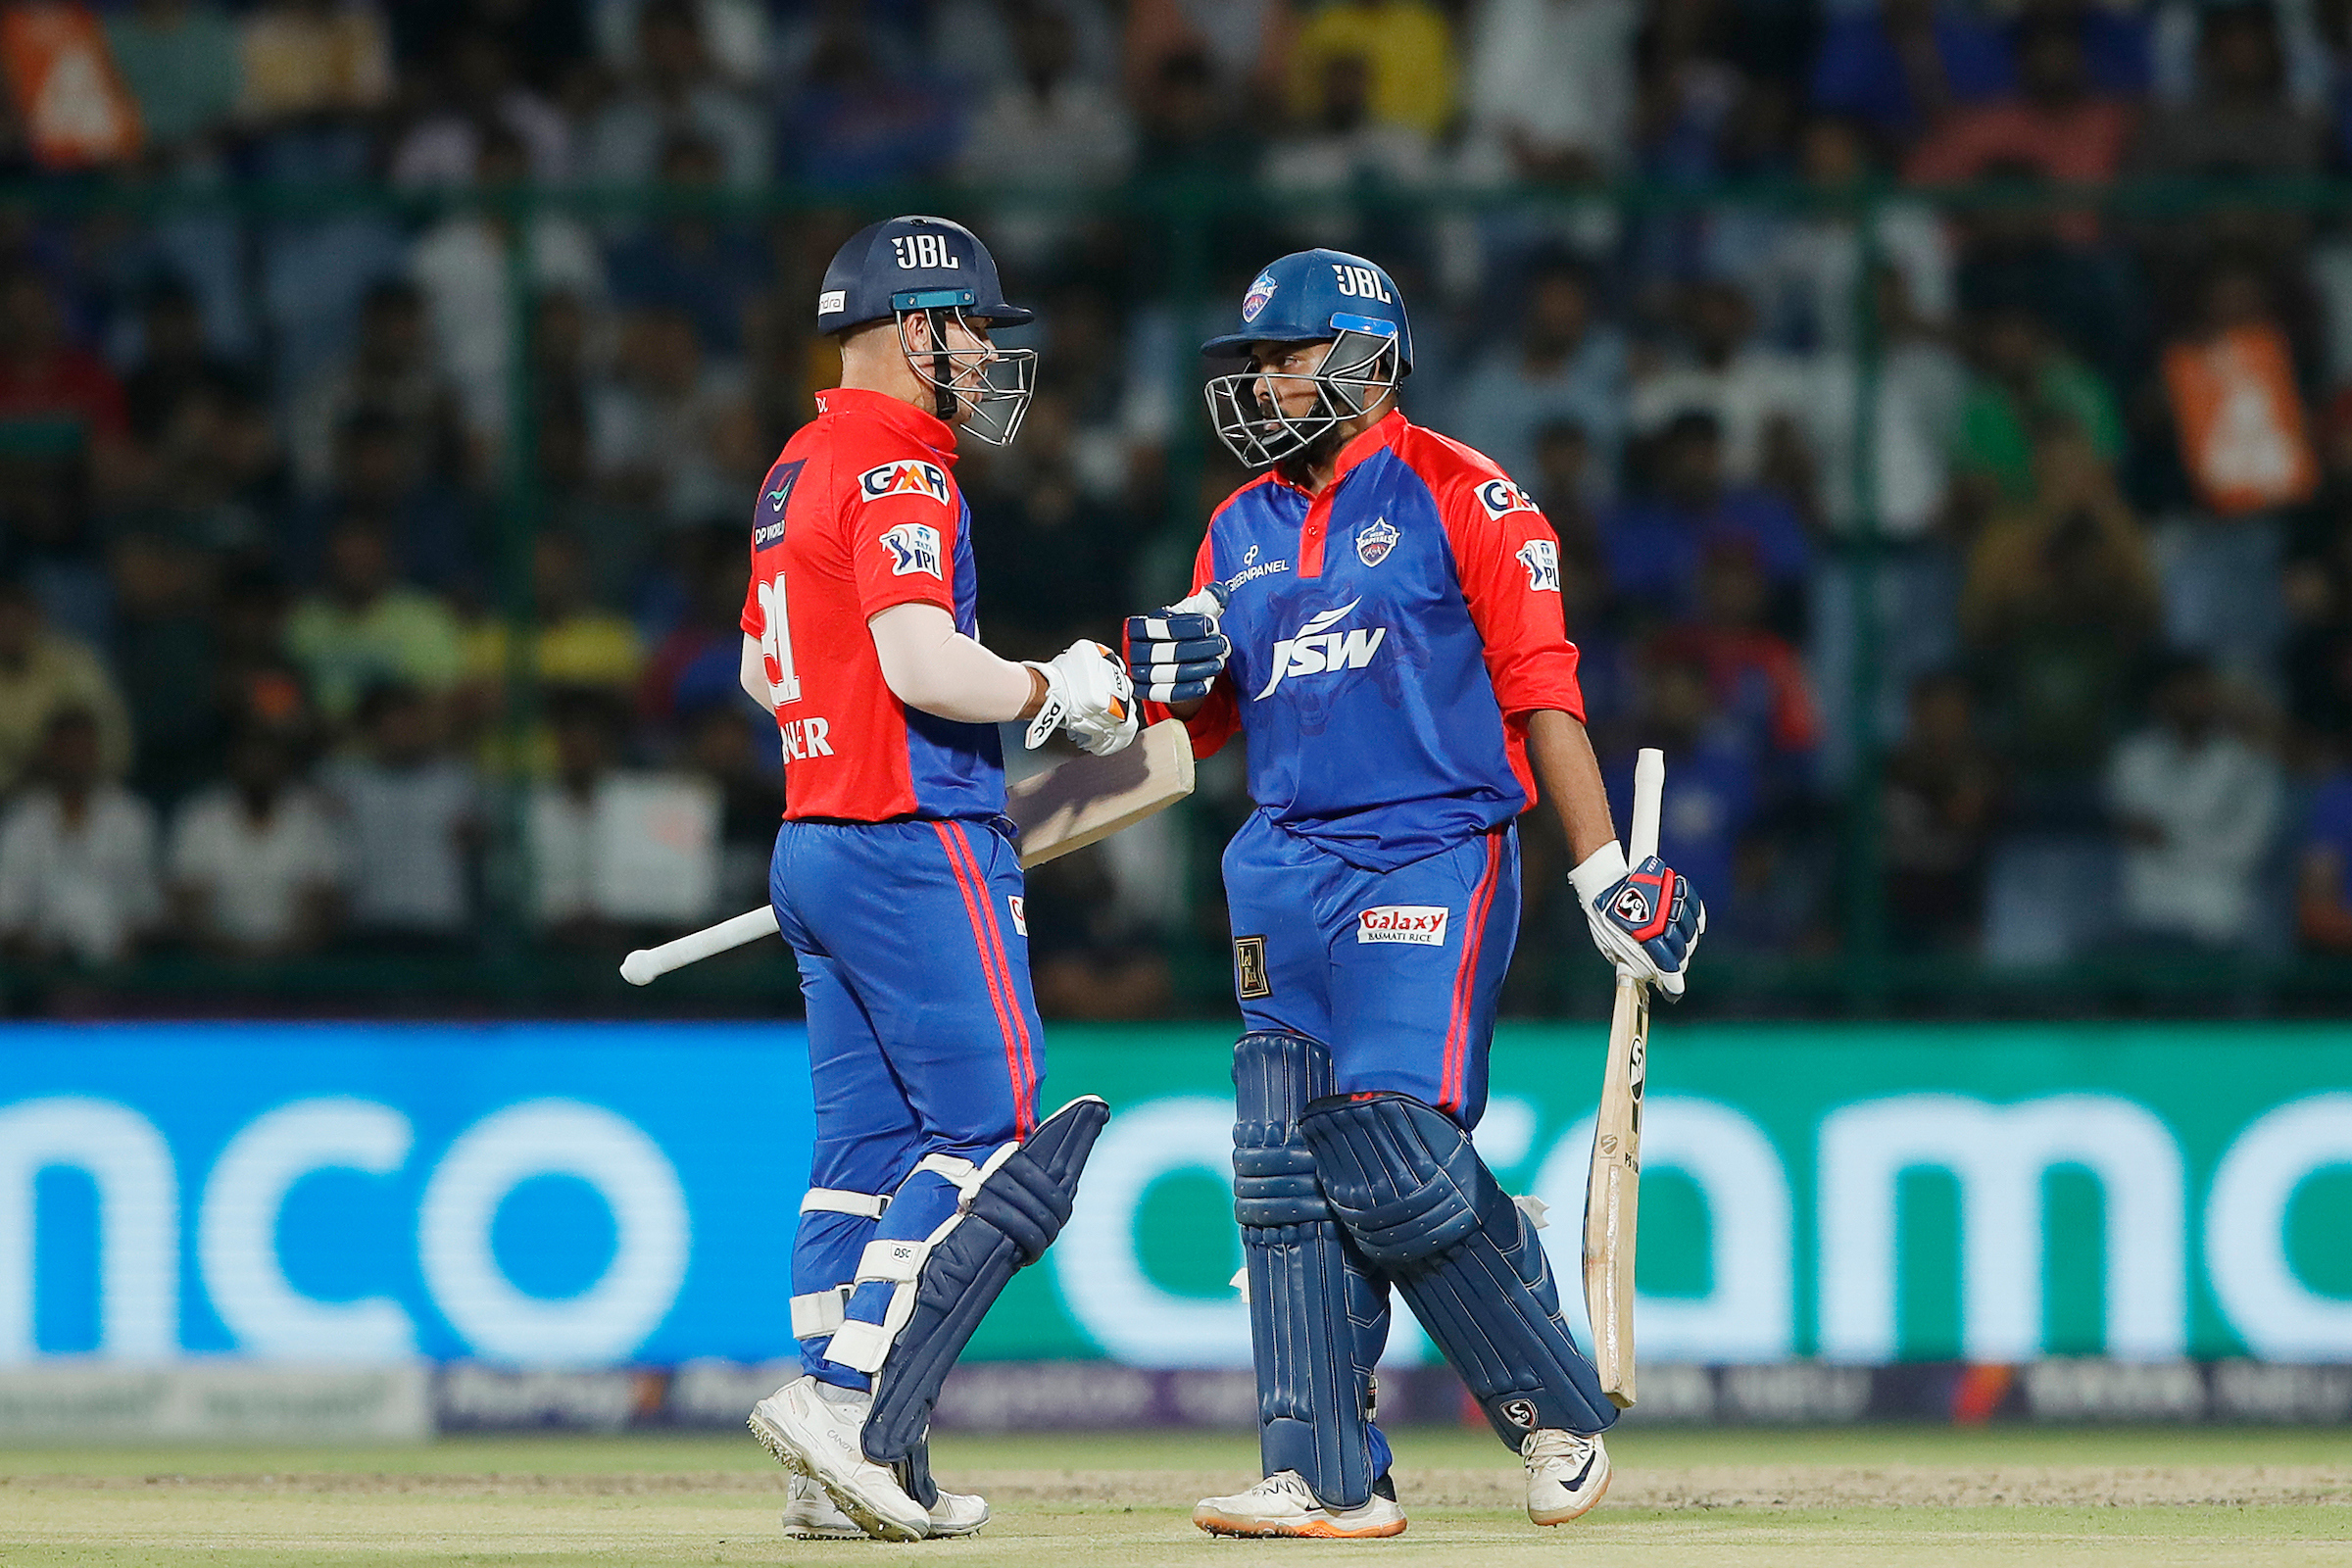 Delhi Capitals huff and puff their way to 1st win